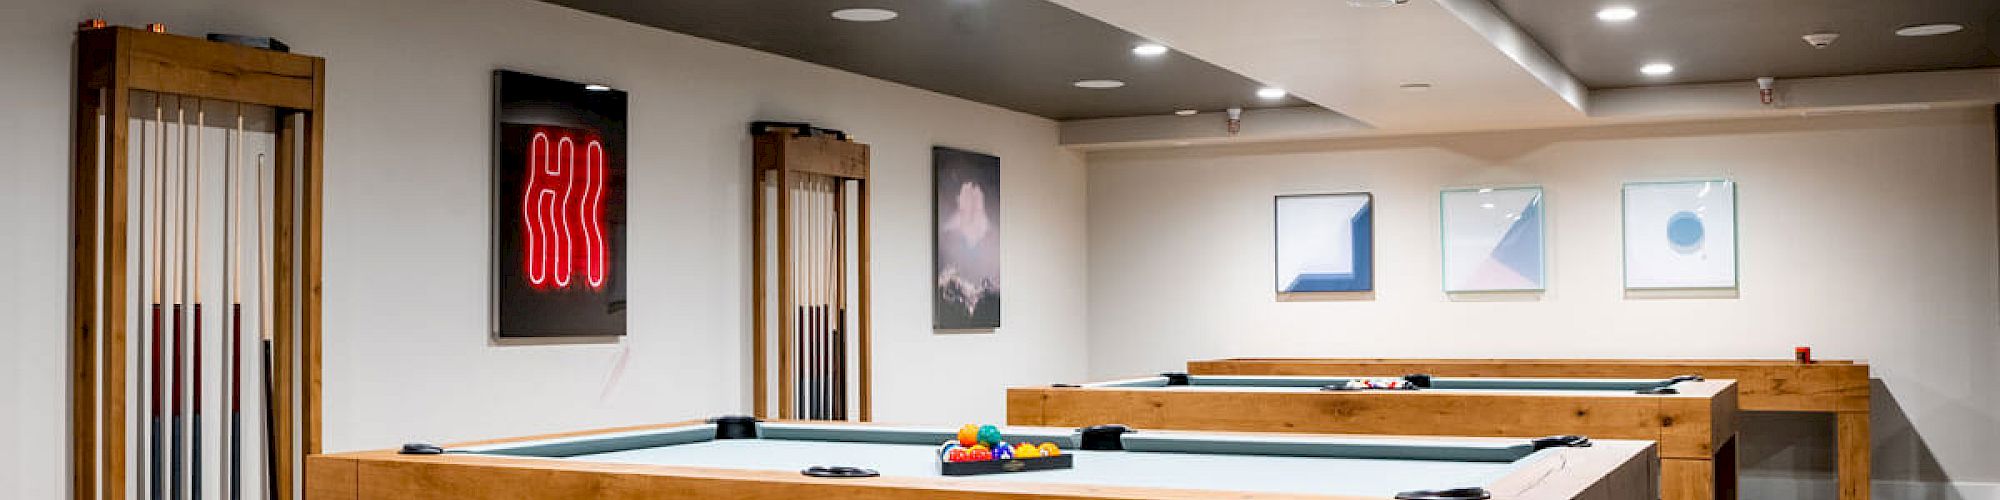 The image shows a game room with pool tables, wall art, cue racks, and modern lighting, featuring a patterned carpet and neatly arranged decor.